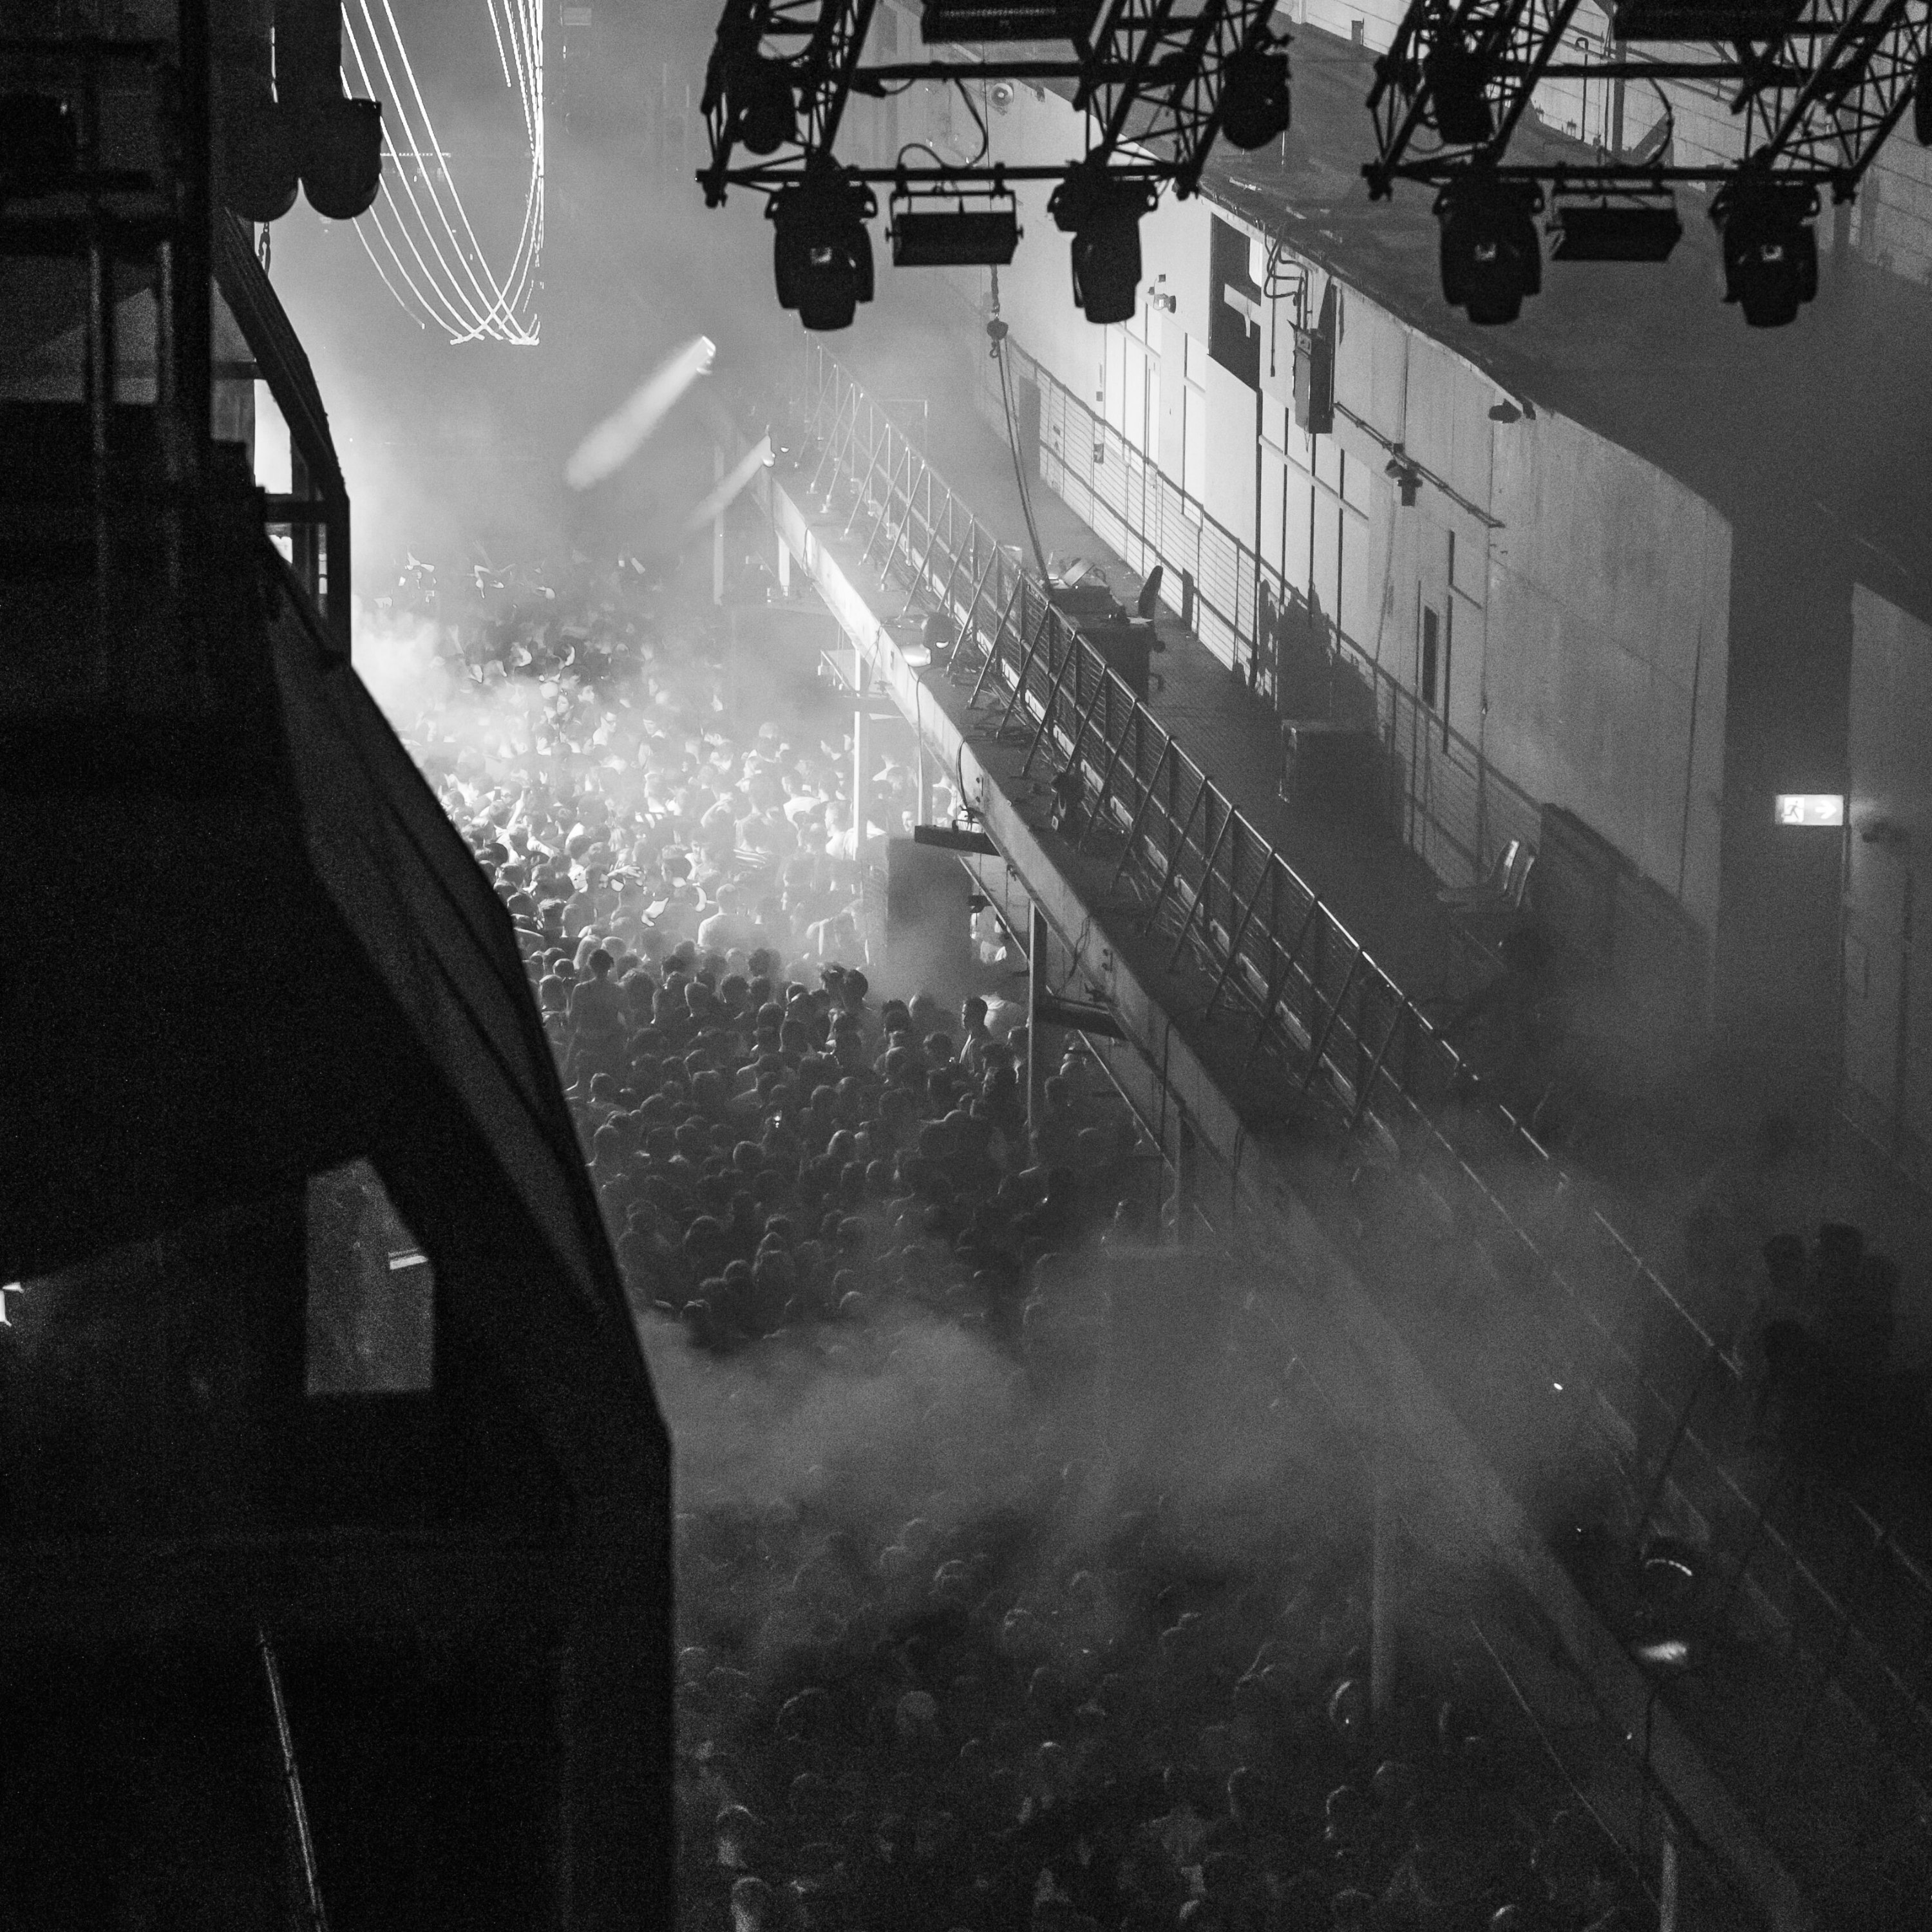 Crowds at a music performance at Printworks London.